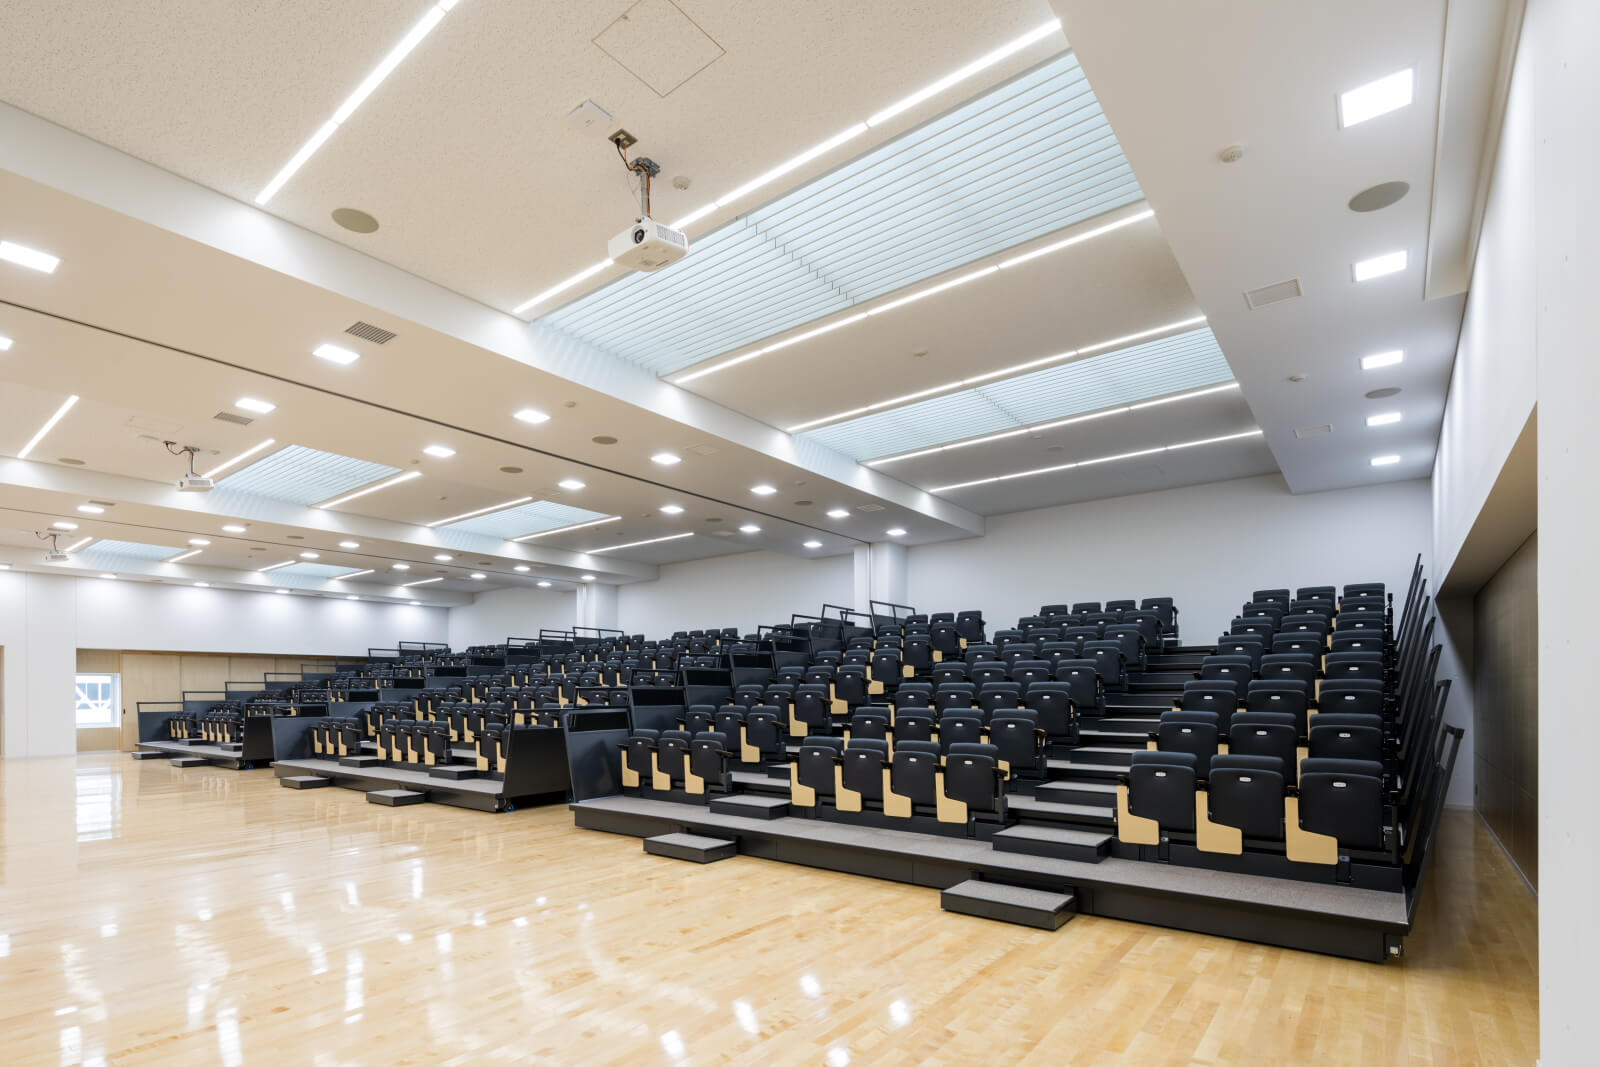 Full Automatic Retractable Seating (Telescopic Seating System)